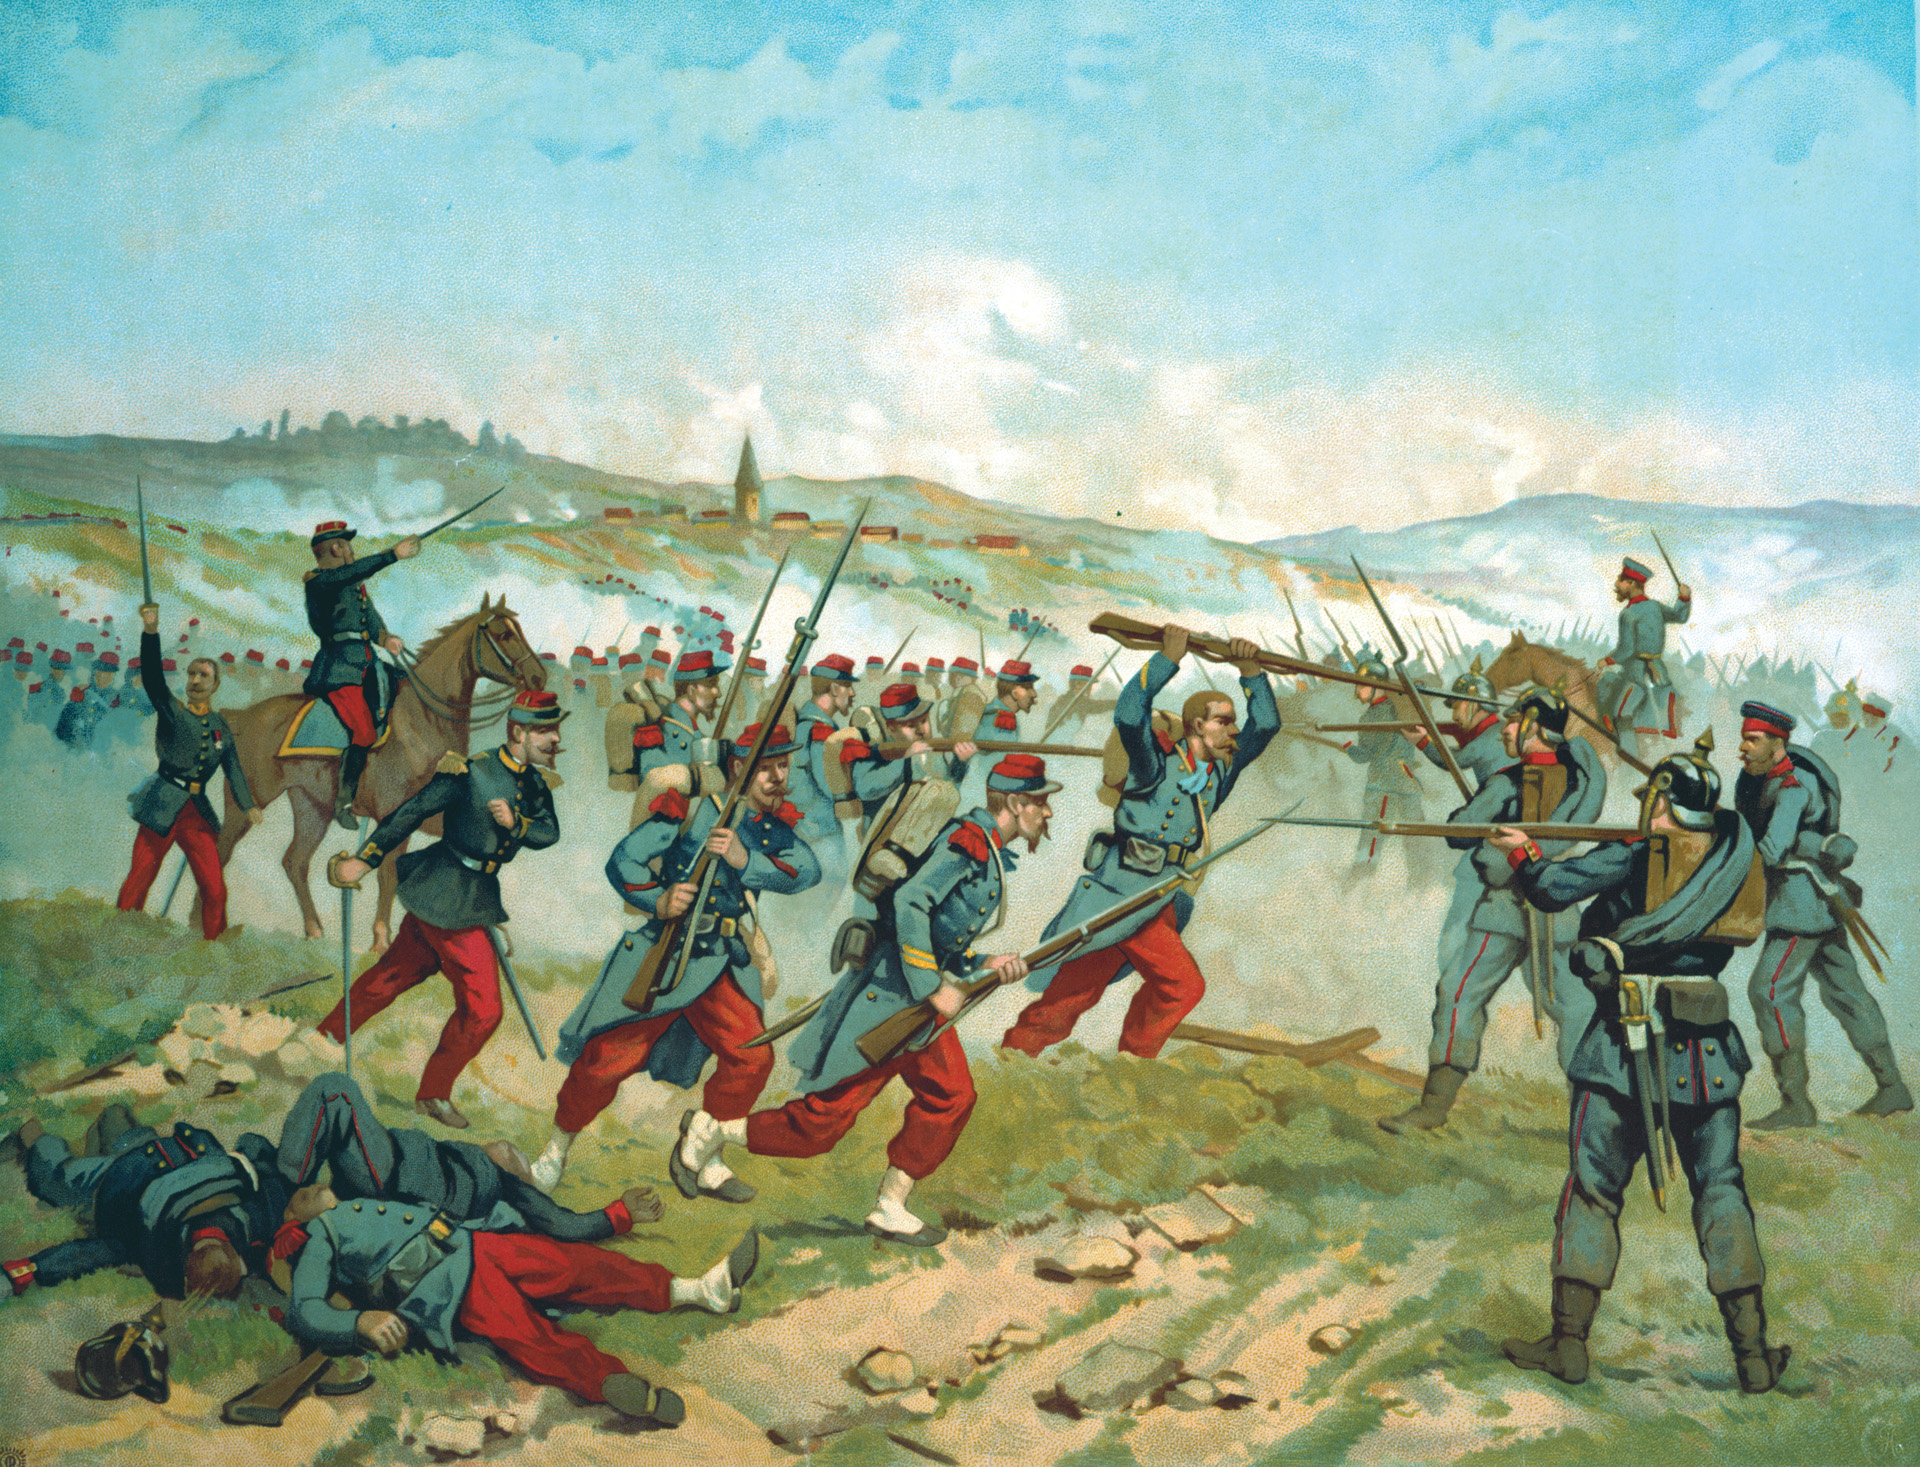 The French did not lack for bravery and were willing to come to close grips with their enemies.